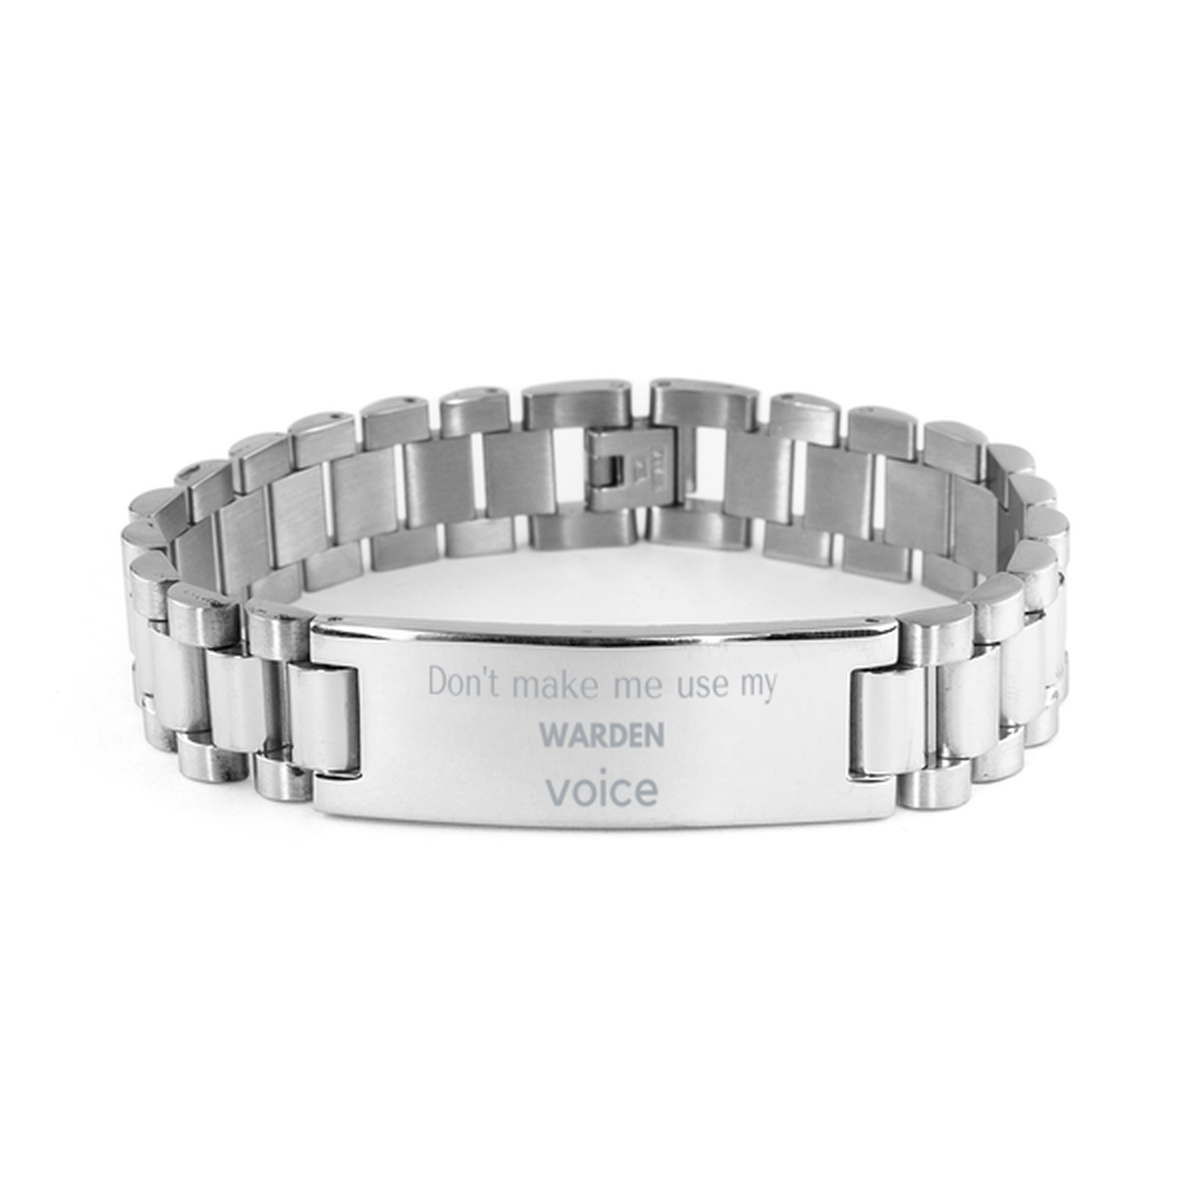 Don't make me use my Warden voice, Sarcasm Warden Gifts, Christmas Warden Ladder Stainless Steel Bracelet Birthday Unique Gifts For Warden Coworkers, Men, Women, Colleague, Friends